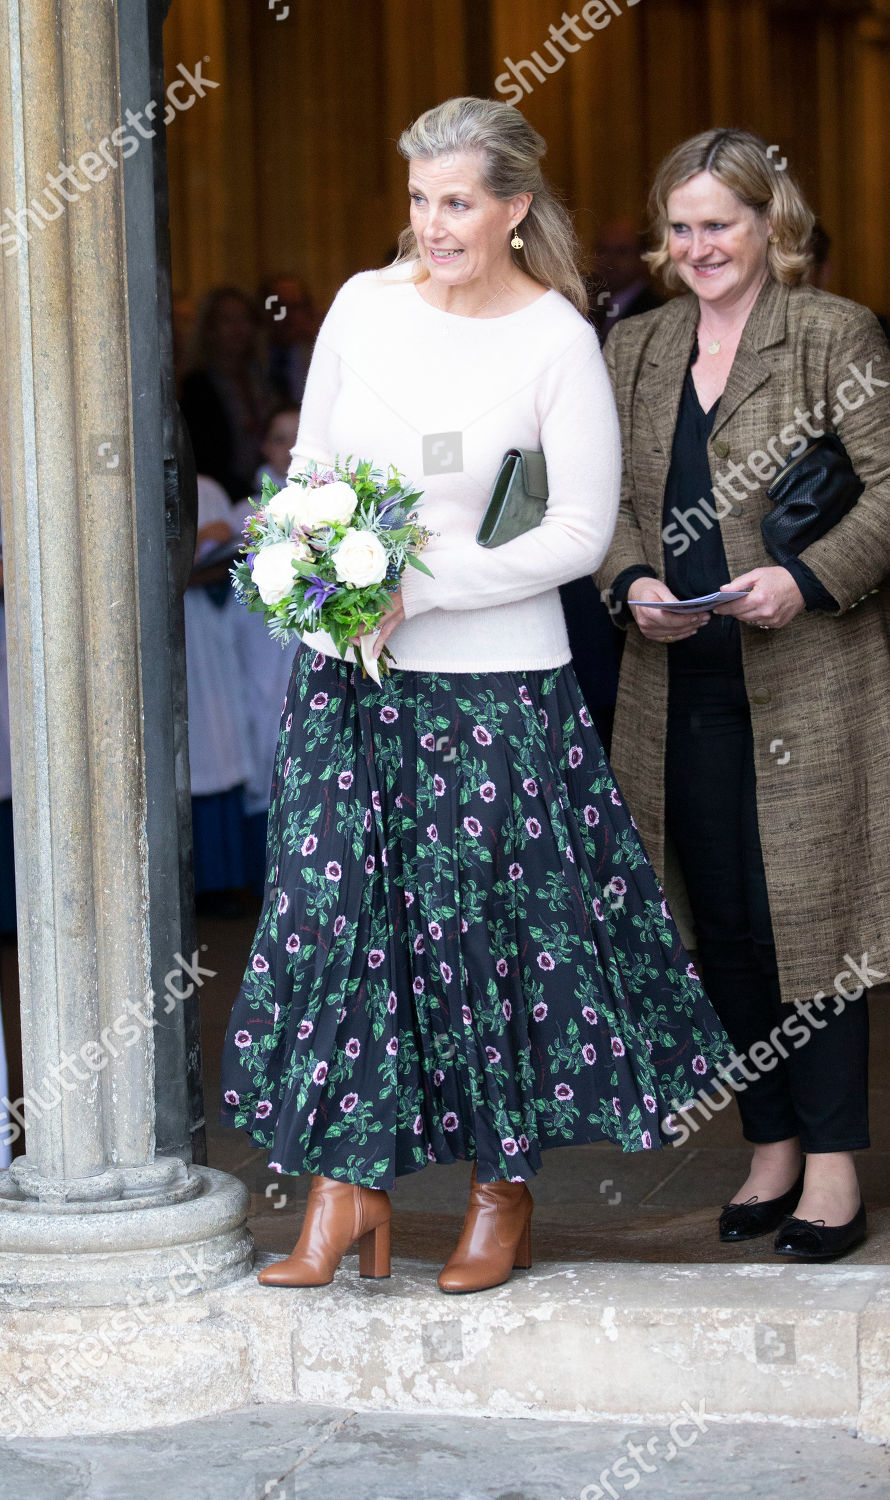 sophie-countess-of-wessex-visit-to-wells-cathedral-and-cathedral-school-somerset-uk-shutterstock-editorial-10422906t.jpg